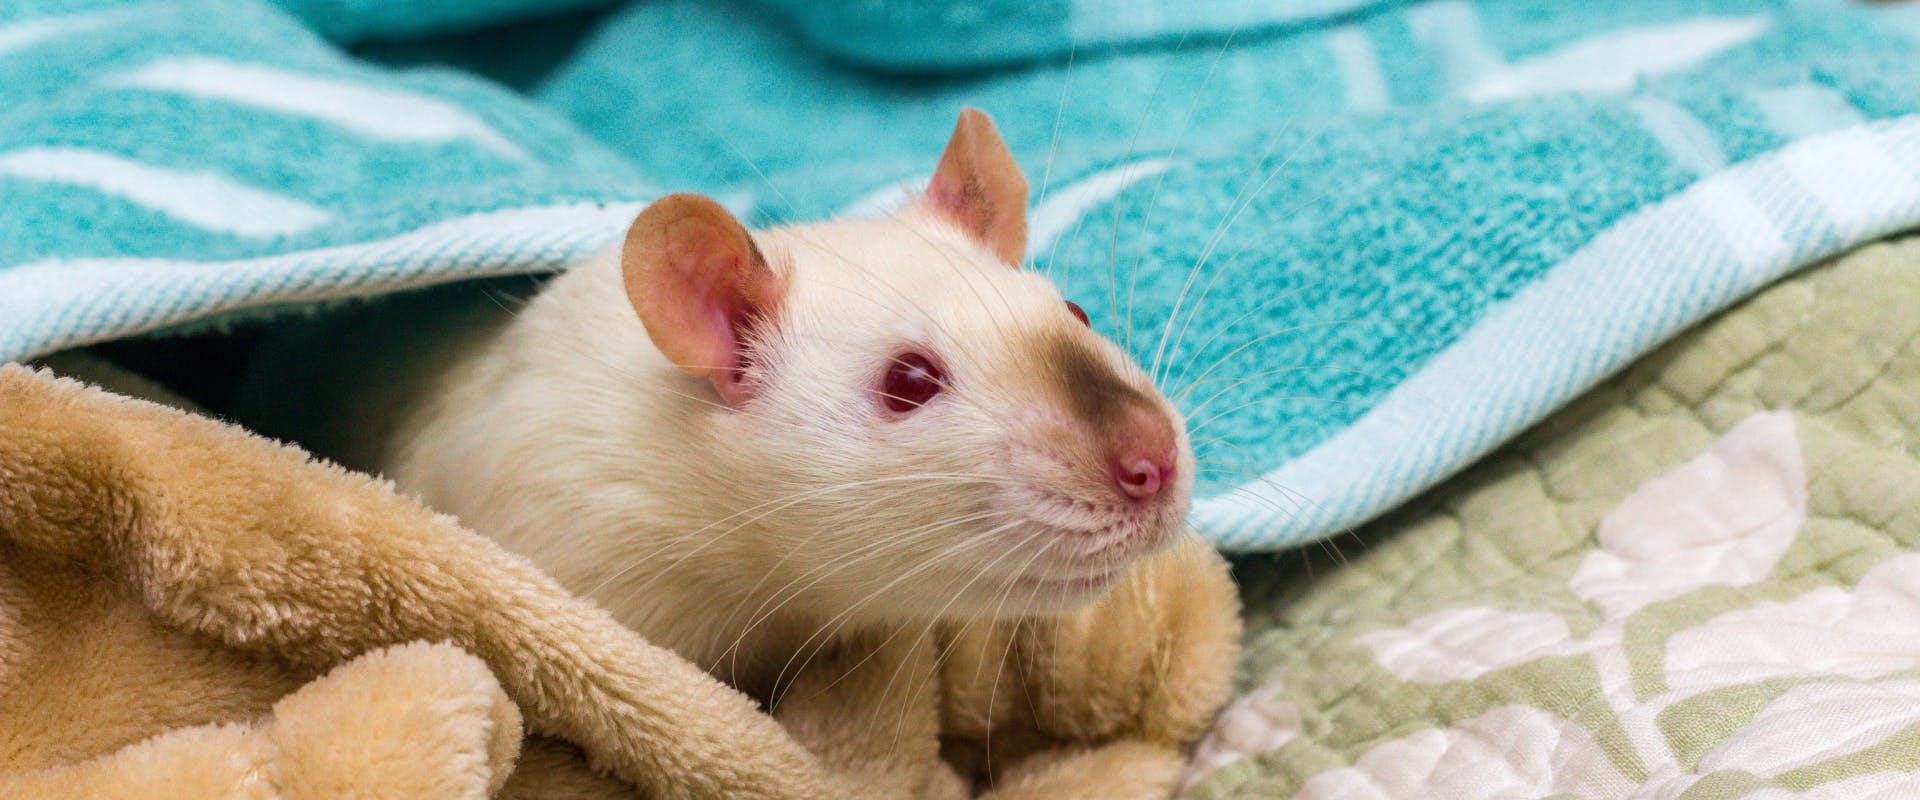 an albino rat poking its head out from underneath a blue towel on top of a duvet